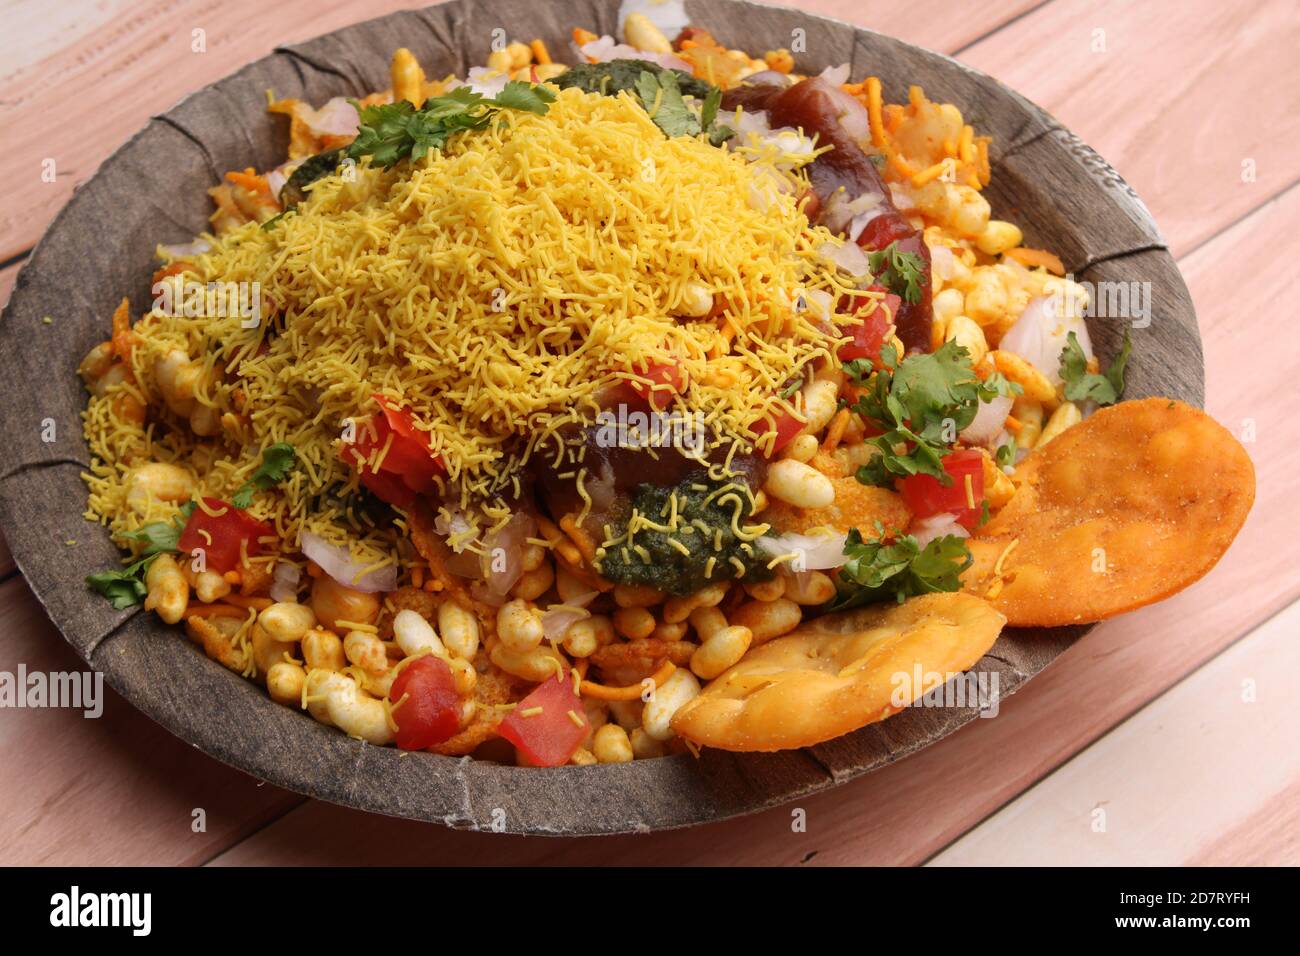 Bhelpuri Chaat/chat is a road side tasty food from India, served in a plate. Stock Photo